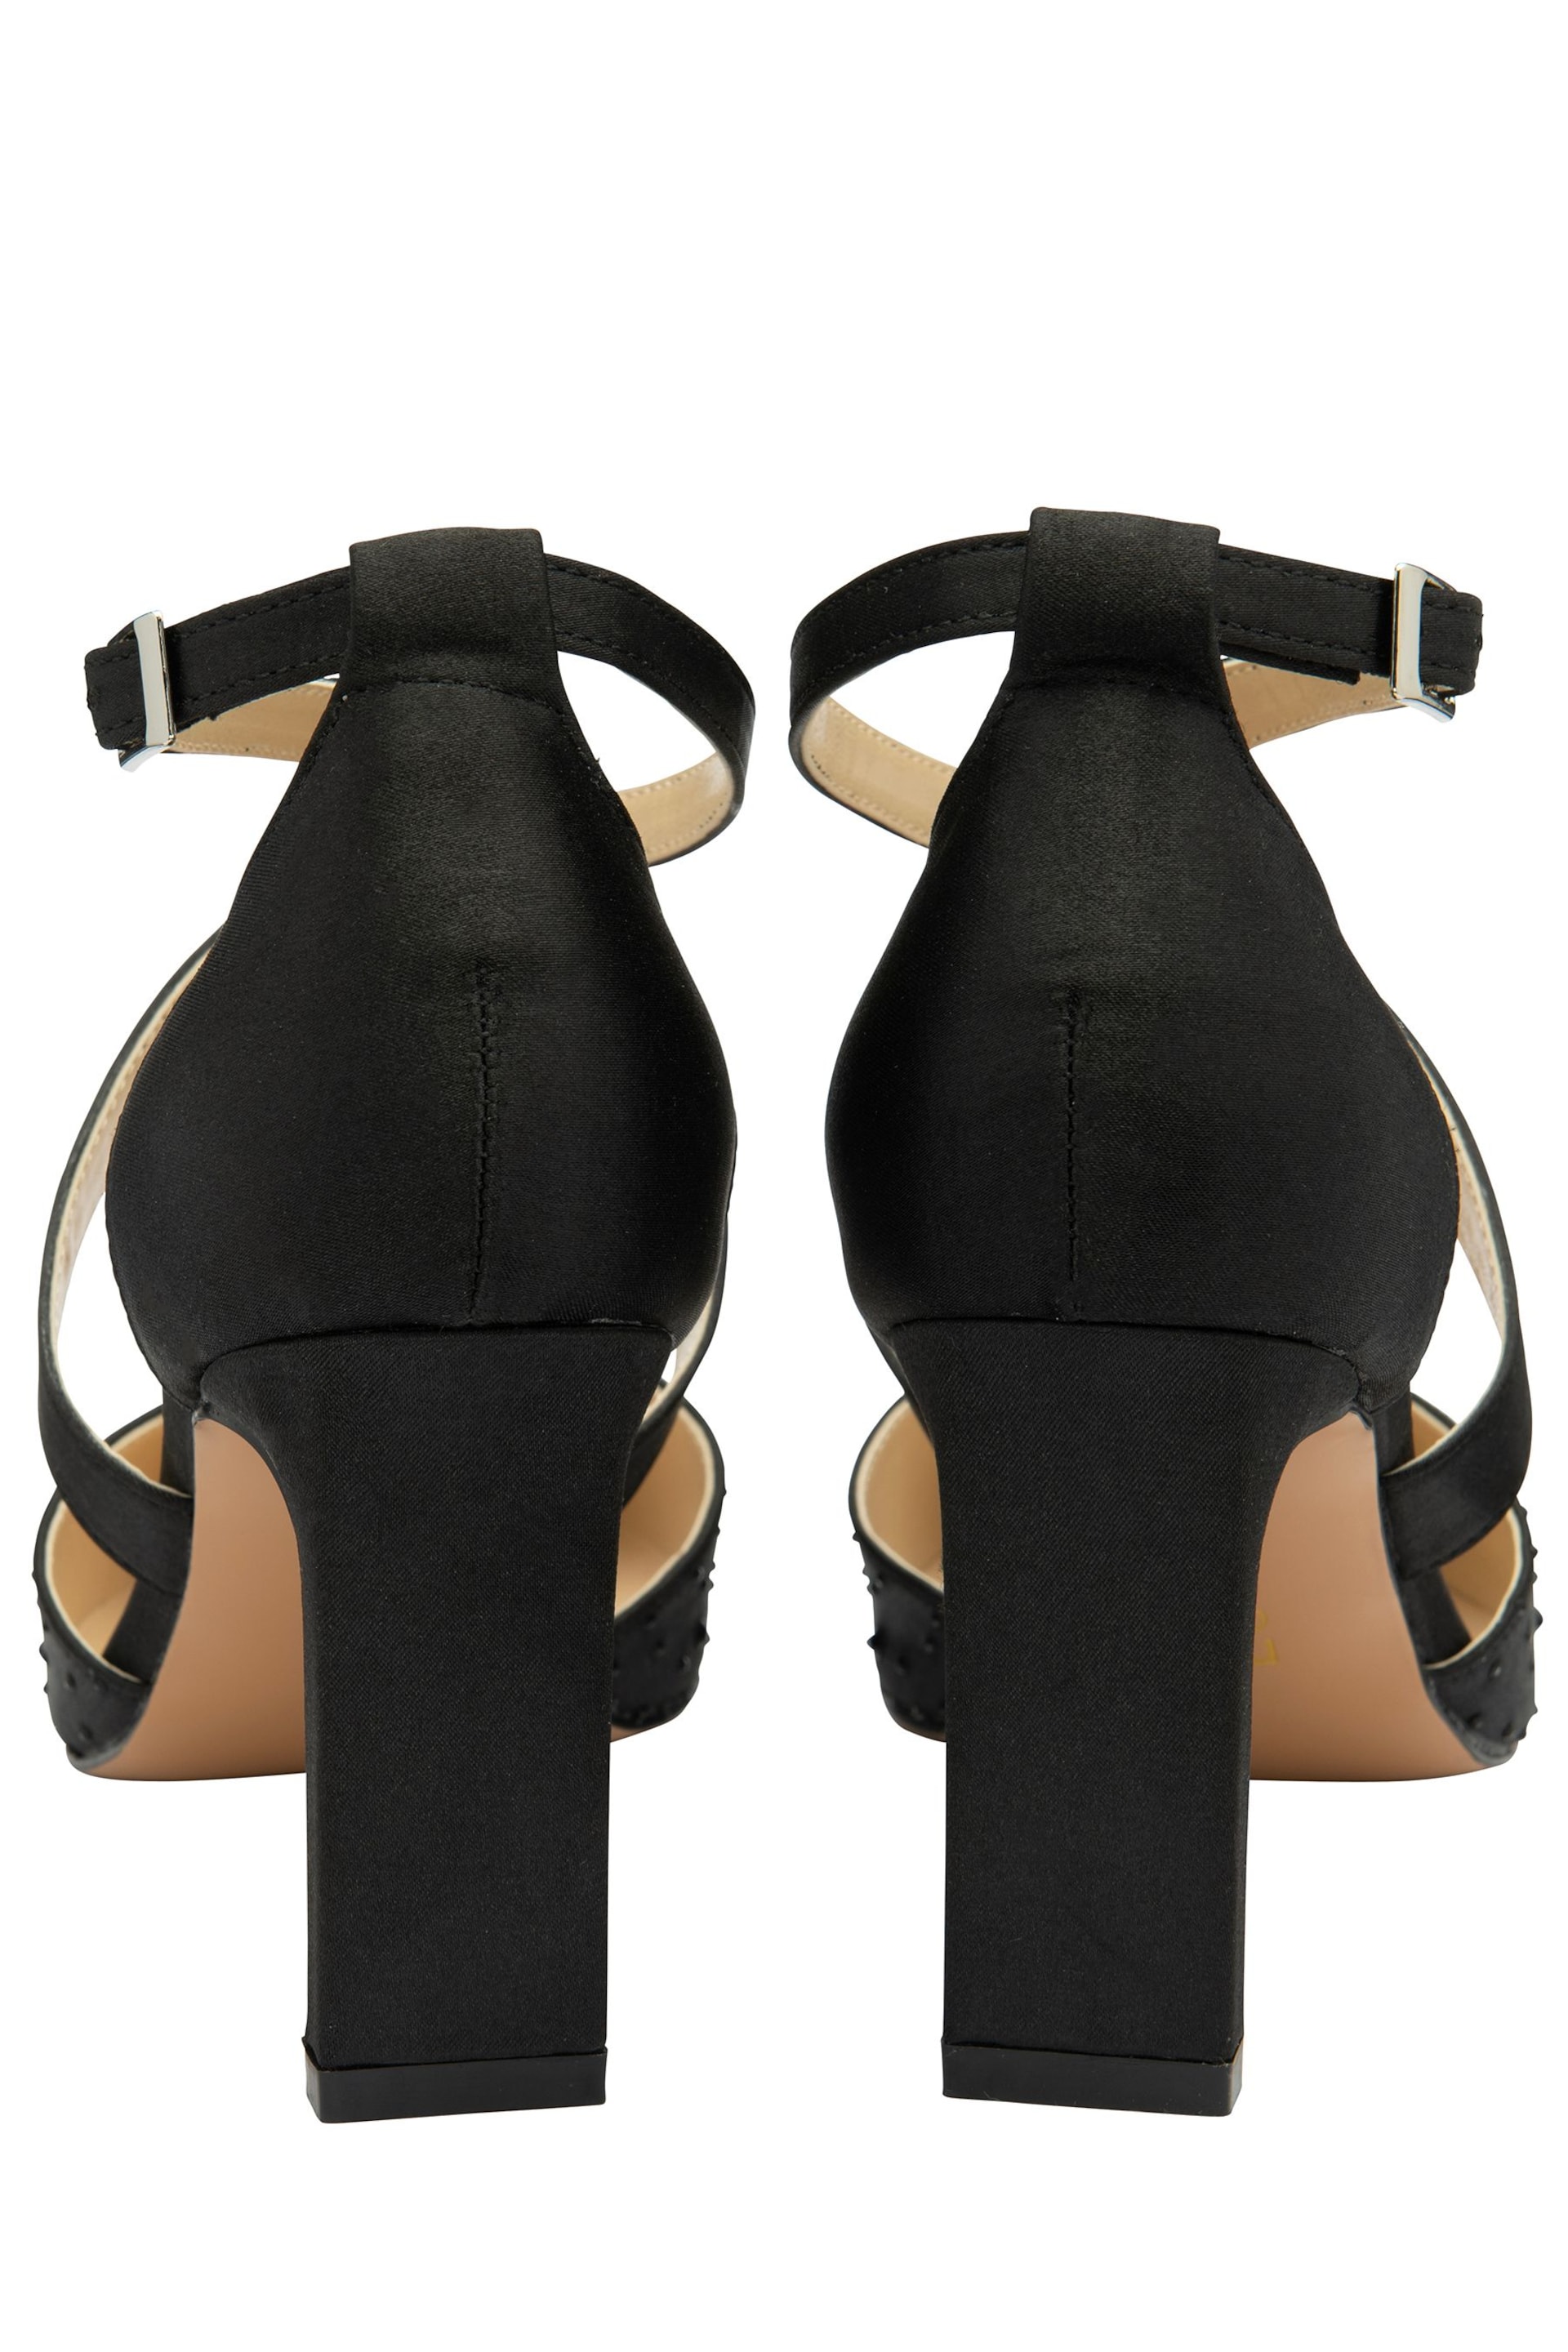 Lotus Black Diamante Pointed-Toe Court Shoes - Image 3 of 4